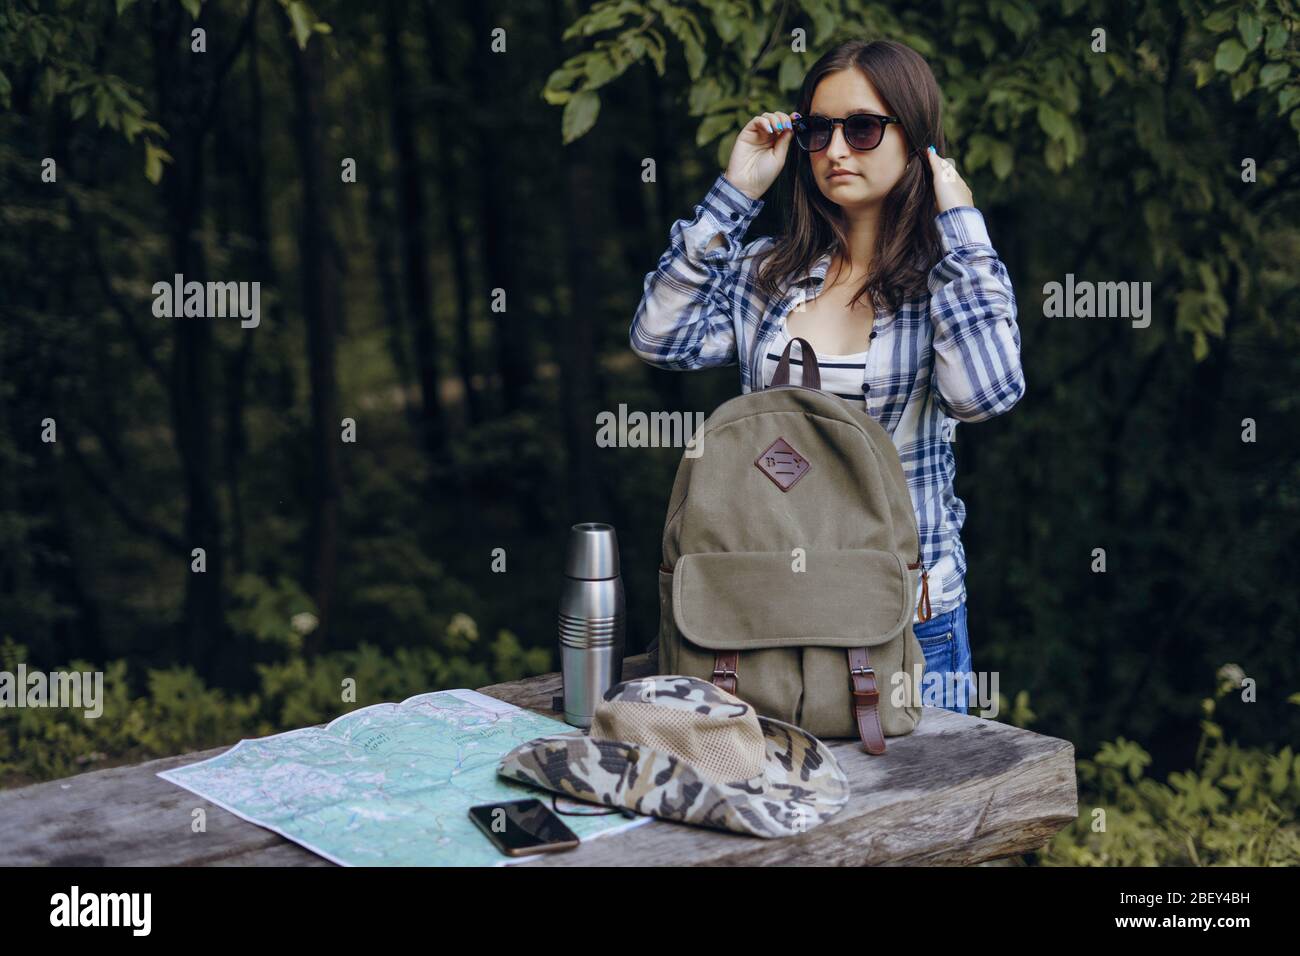 Girl in sunglasses in the forest with a backpack. Tourist map, thermos on a wooden table. Stock Photo